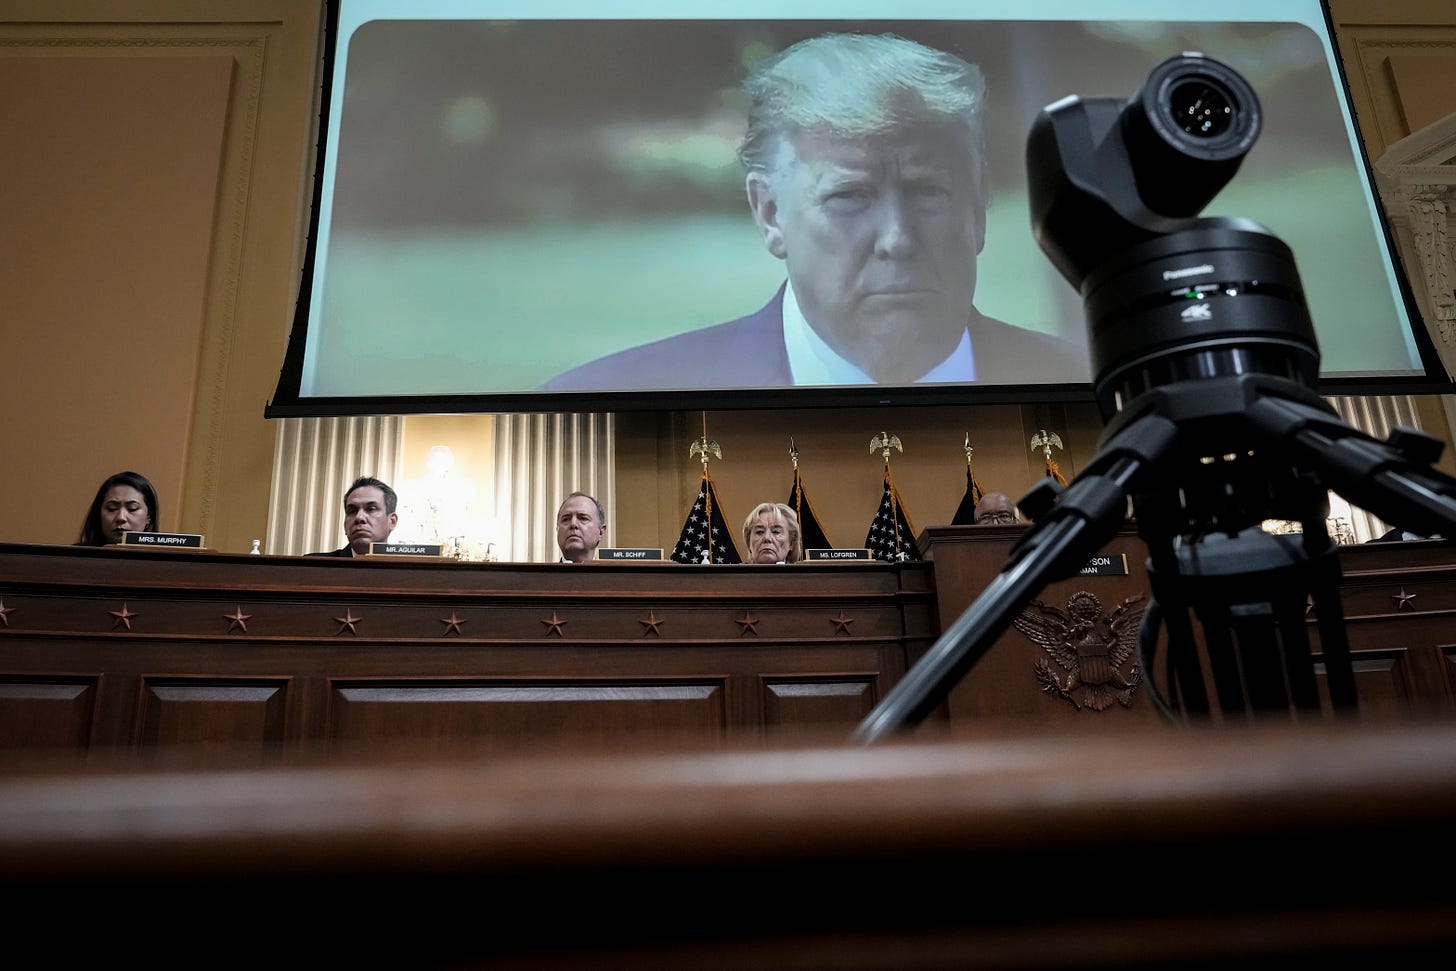  Former U.S. President Donald Trump is displayed on a screen during a hearing by the Select Committee to Investigate the January 6th Attack on the U.S. Capitol on June 9, 2022 in Washington, DC. (Photo by Drew Angerer/Getty Images).